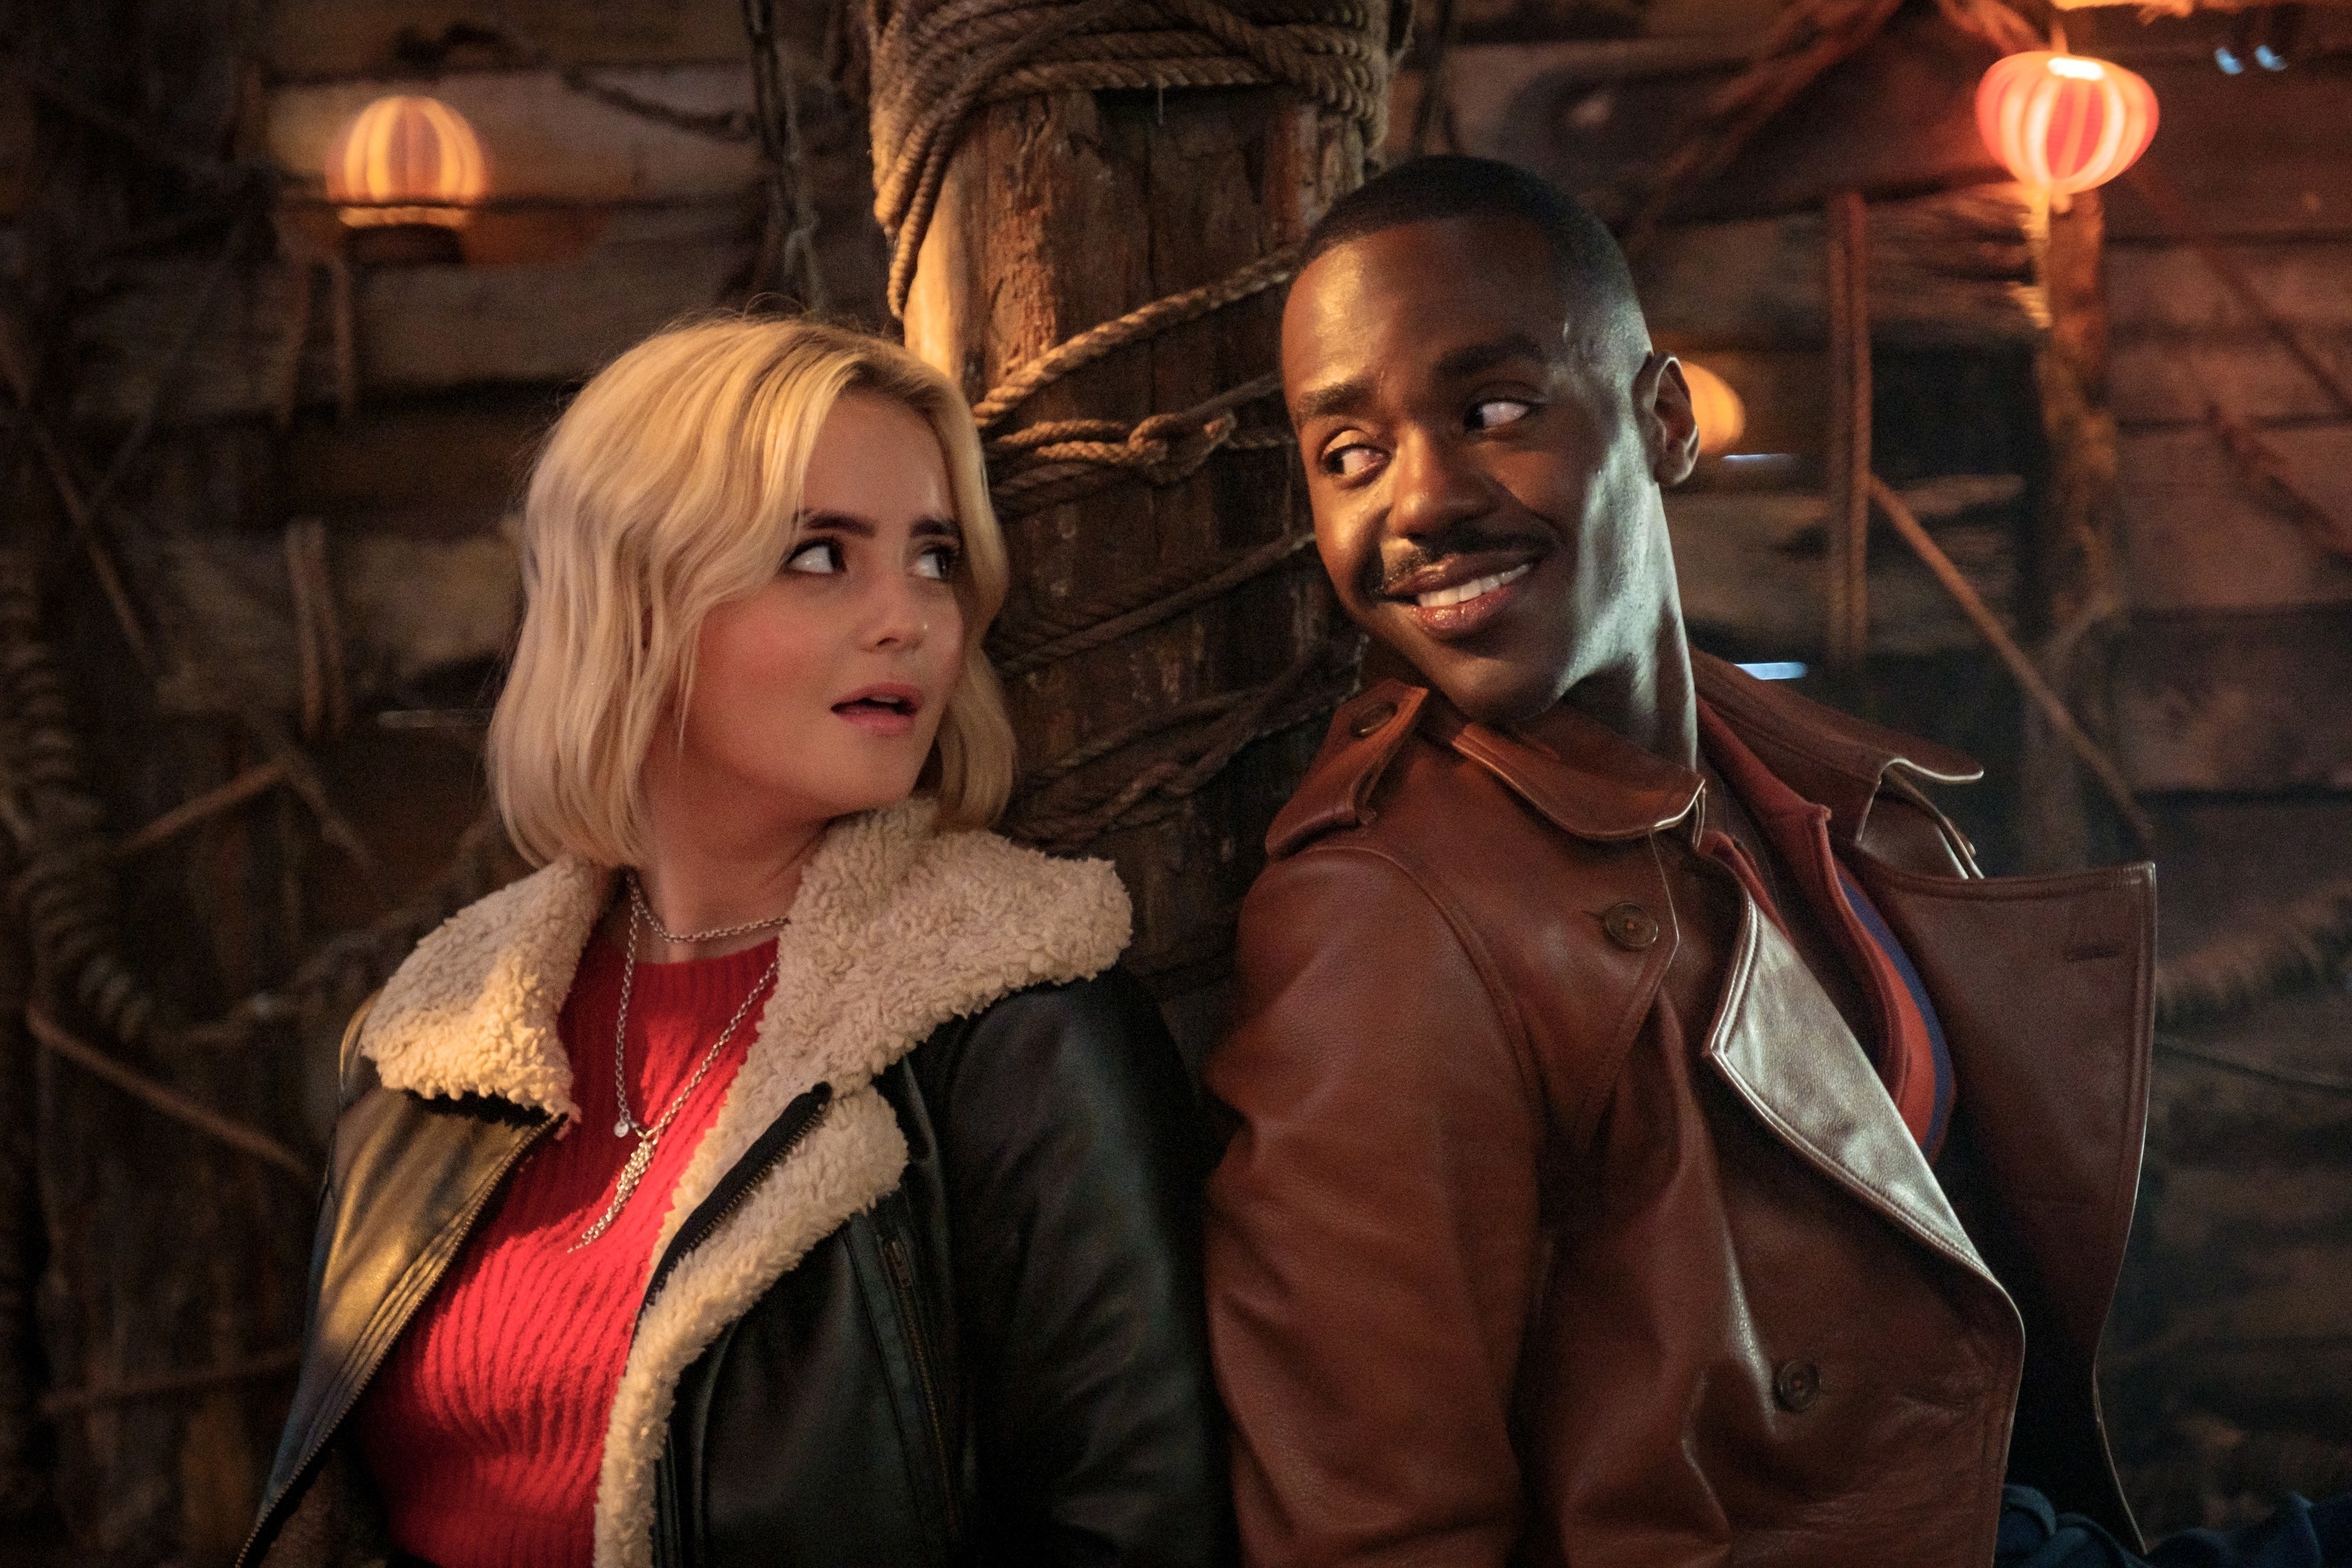 Ruby in a shearling jacket over top and the Doctor in a leather jacket, both smiling, in a warmly lit setting